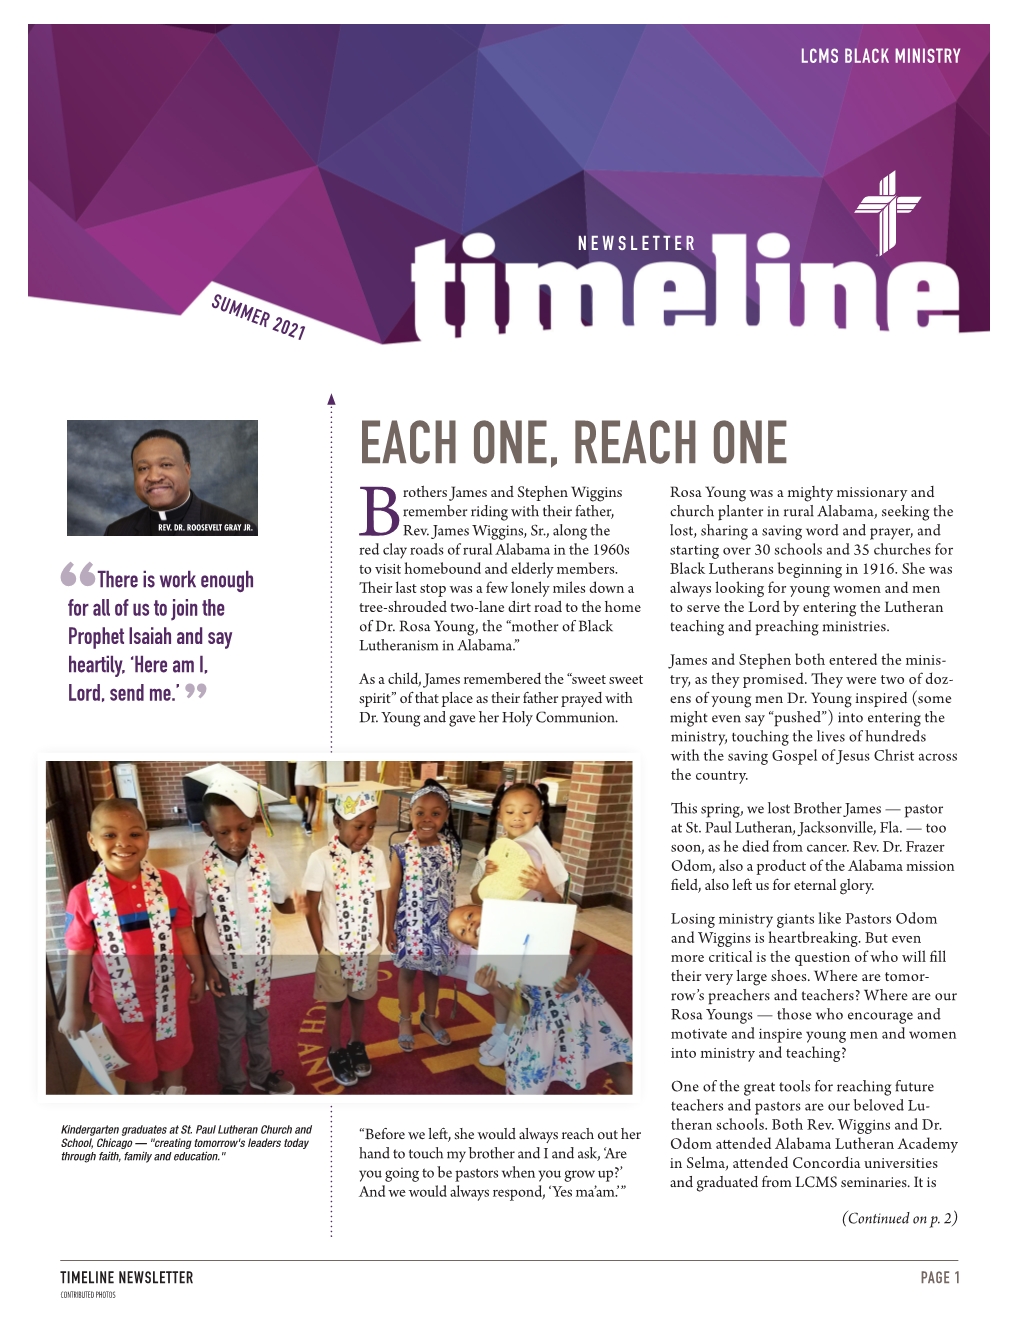 TIMELINE NEWSLETTER PAGE 1 CONTRIBUTED PHOTOS (Continued from P